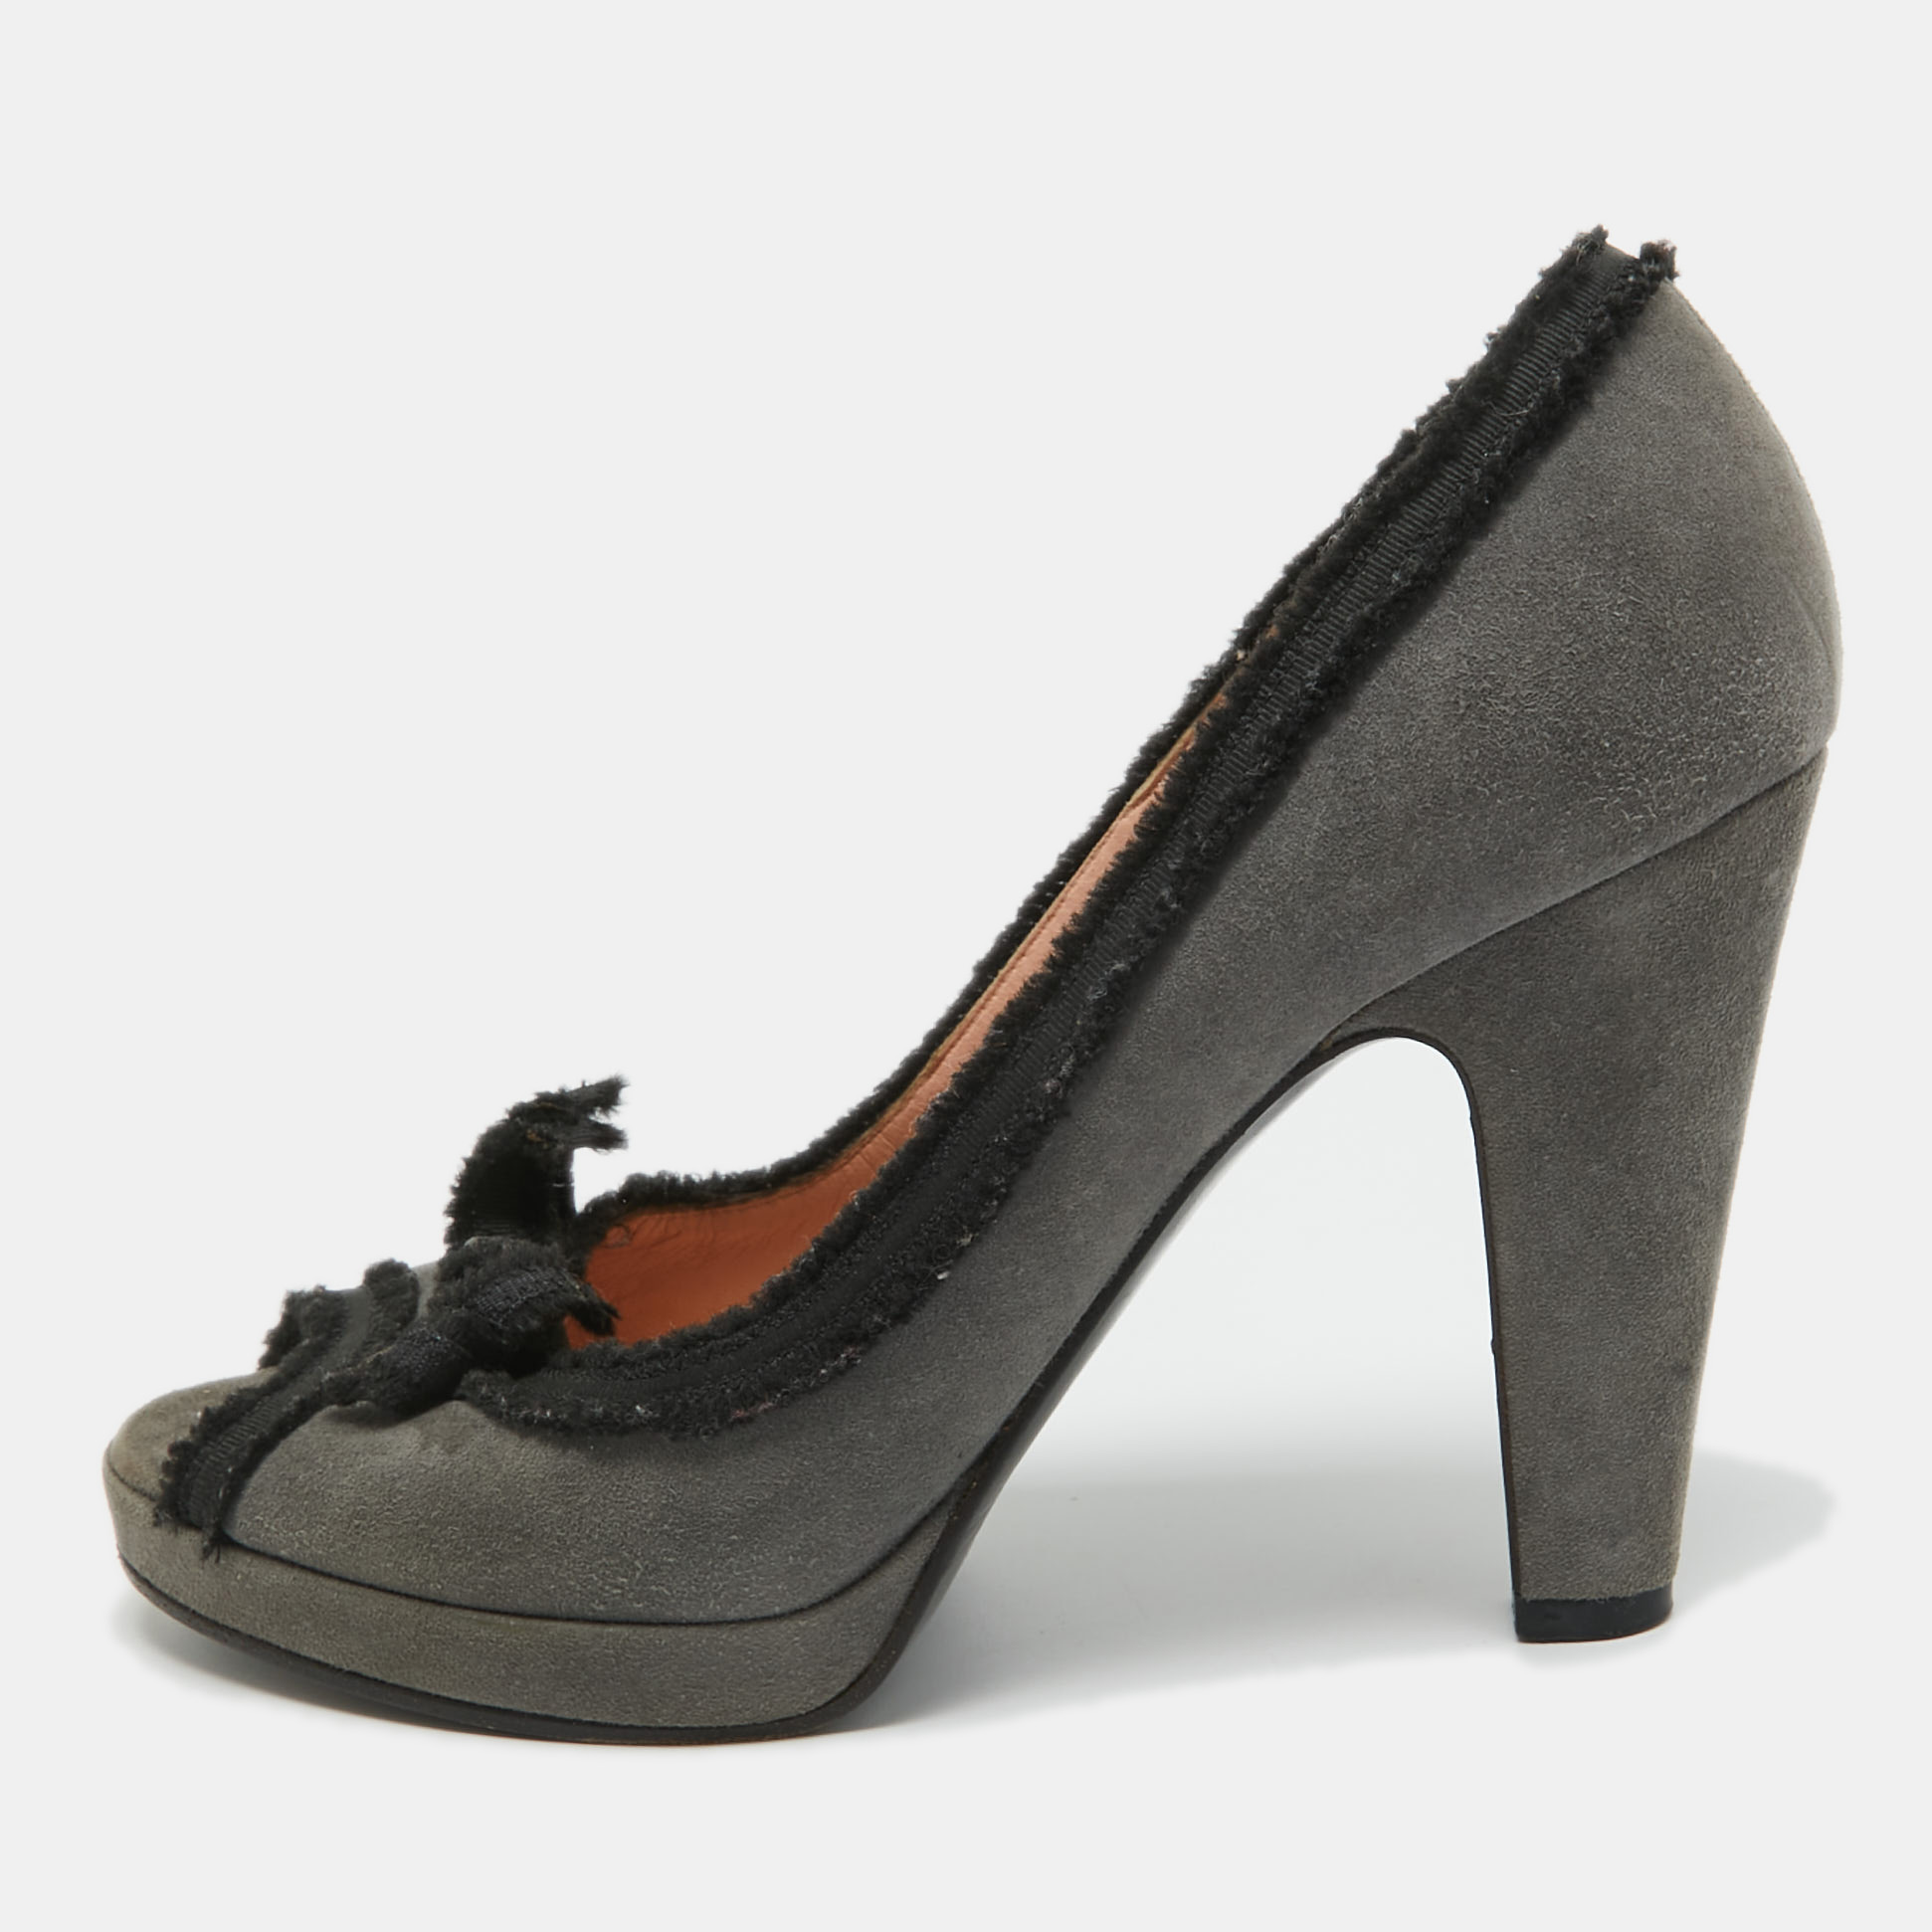 Marc by marc jacobs grey/black suede and fabric bow peep toe platform pumps size 37